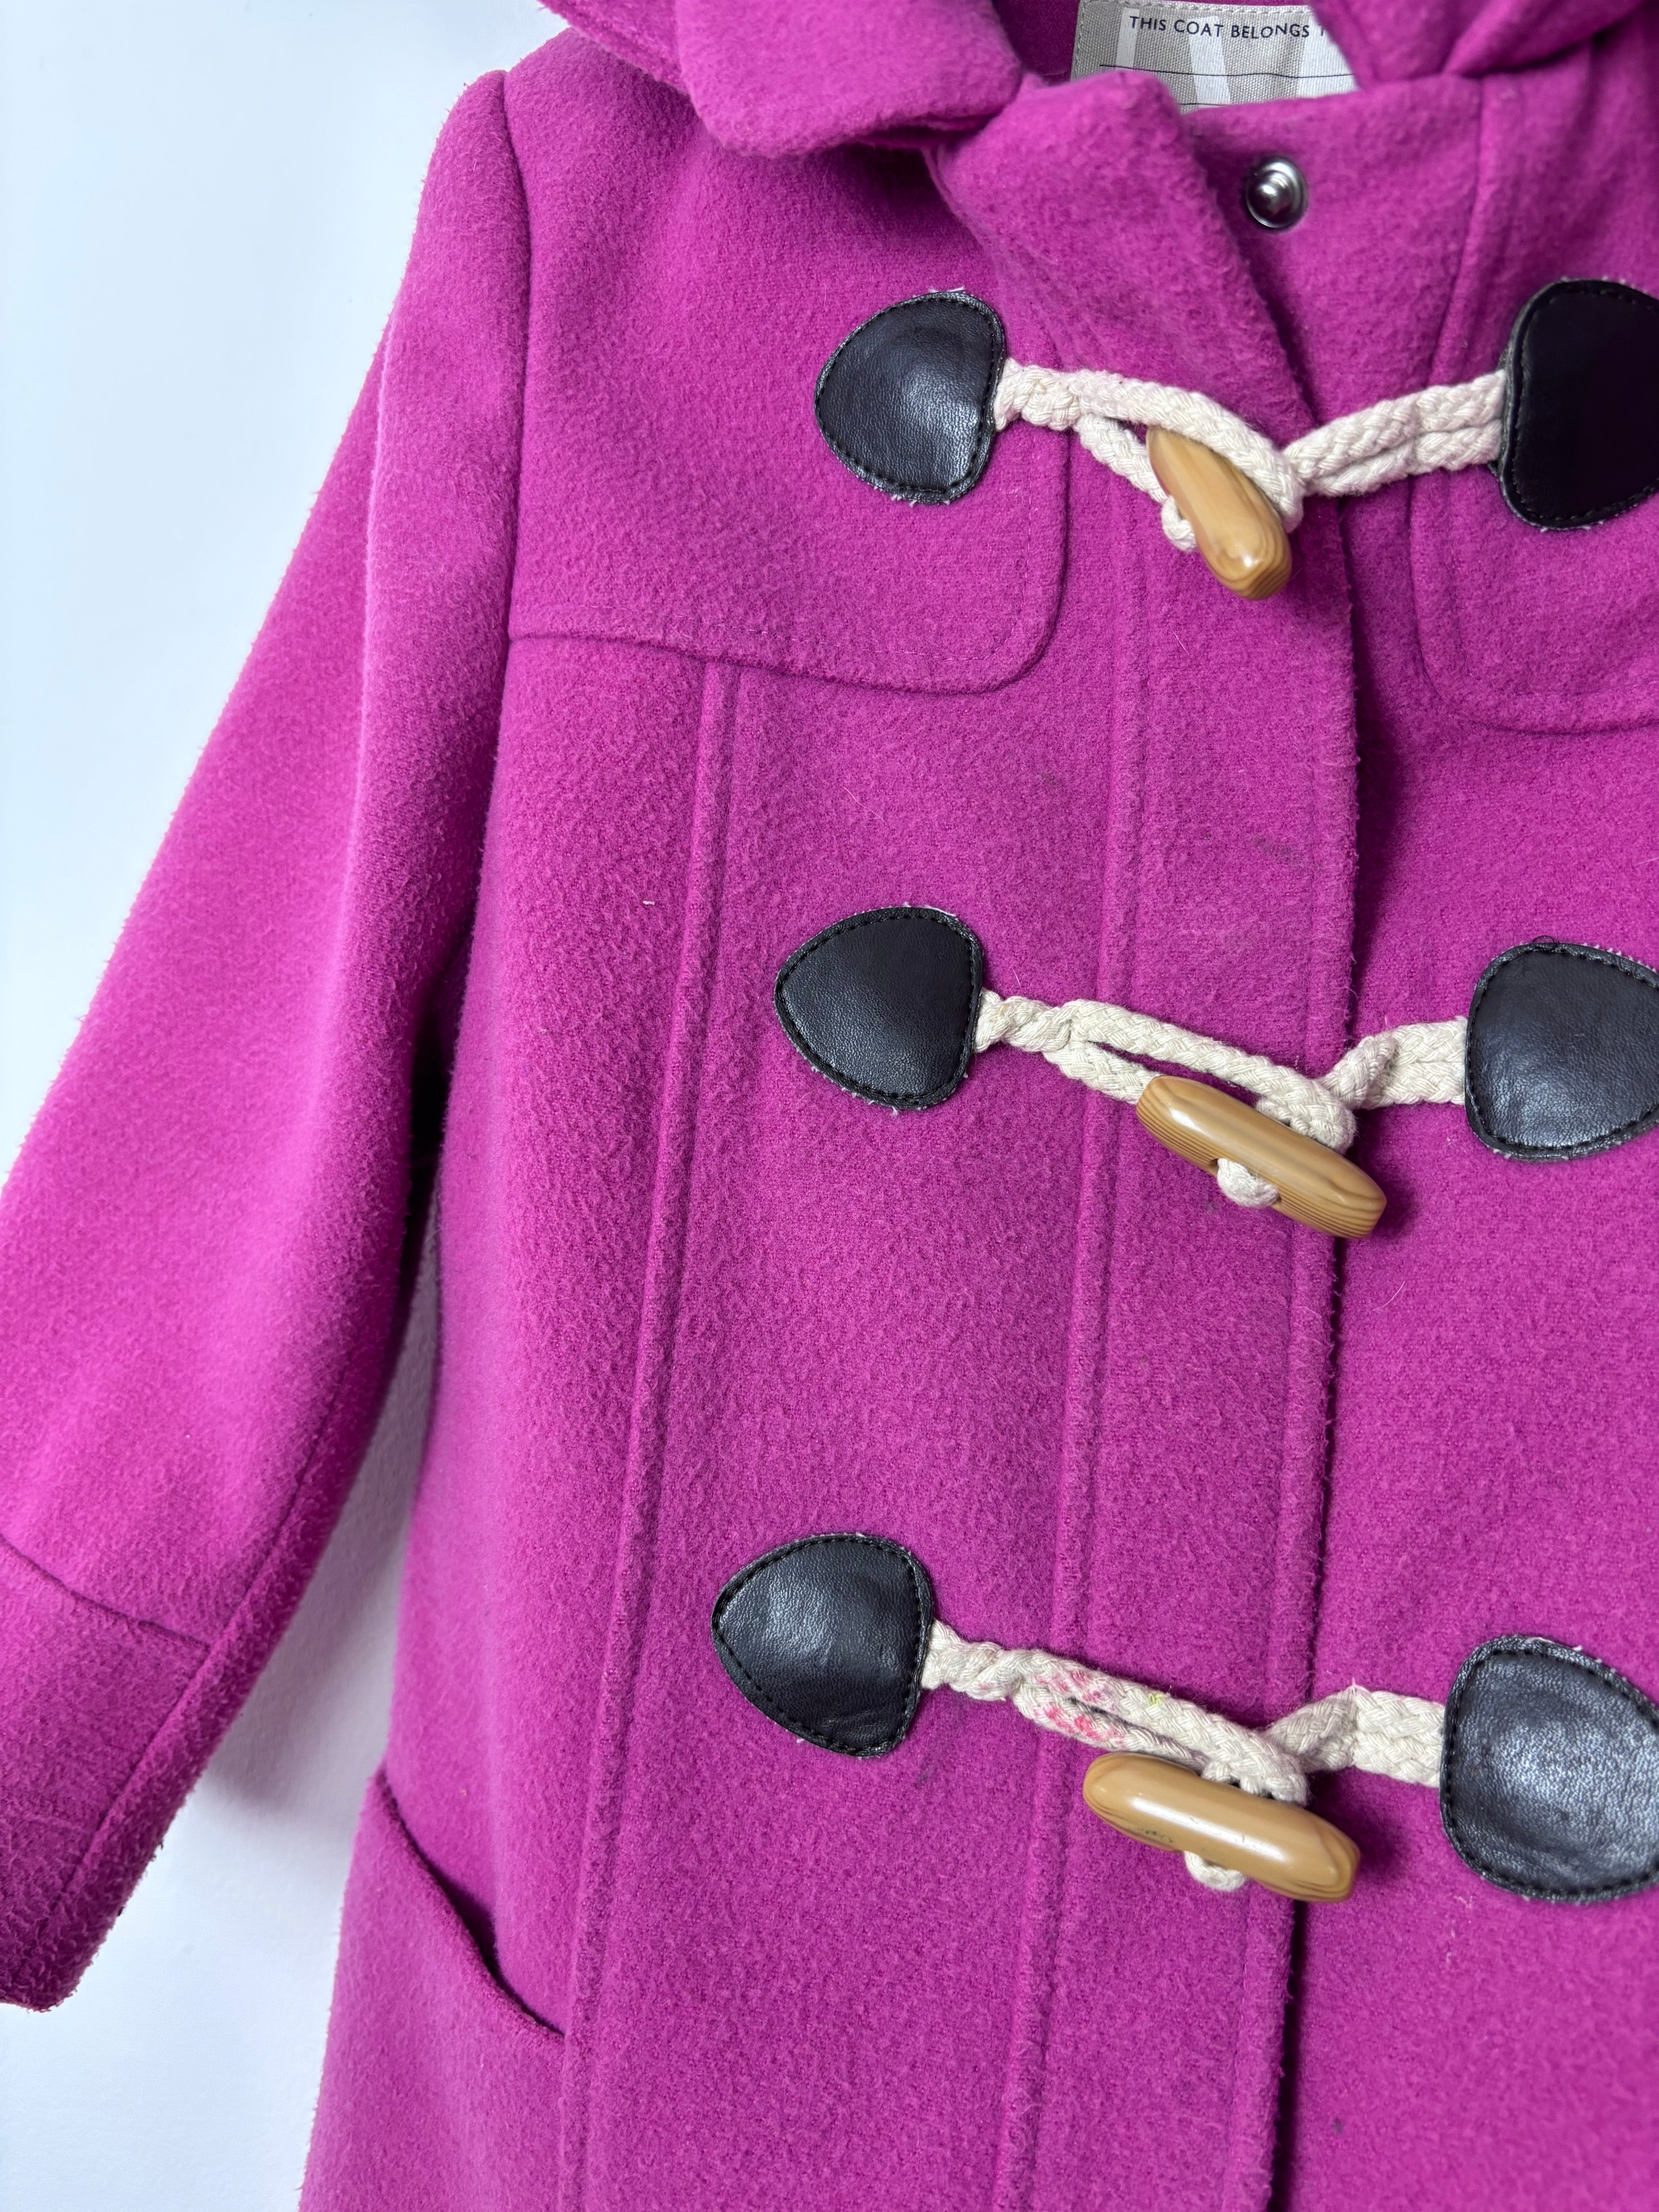 John Lewis 5 Years-Coats-Second Snuggle Preloved